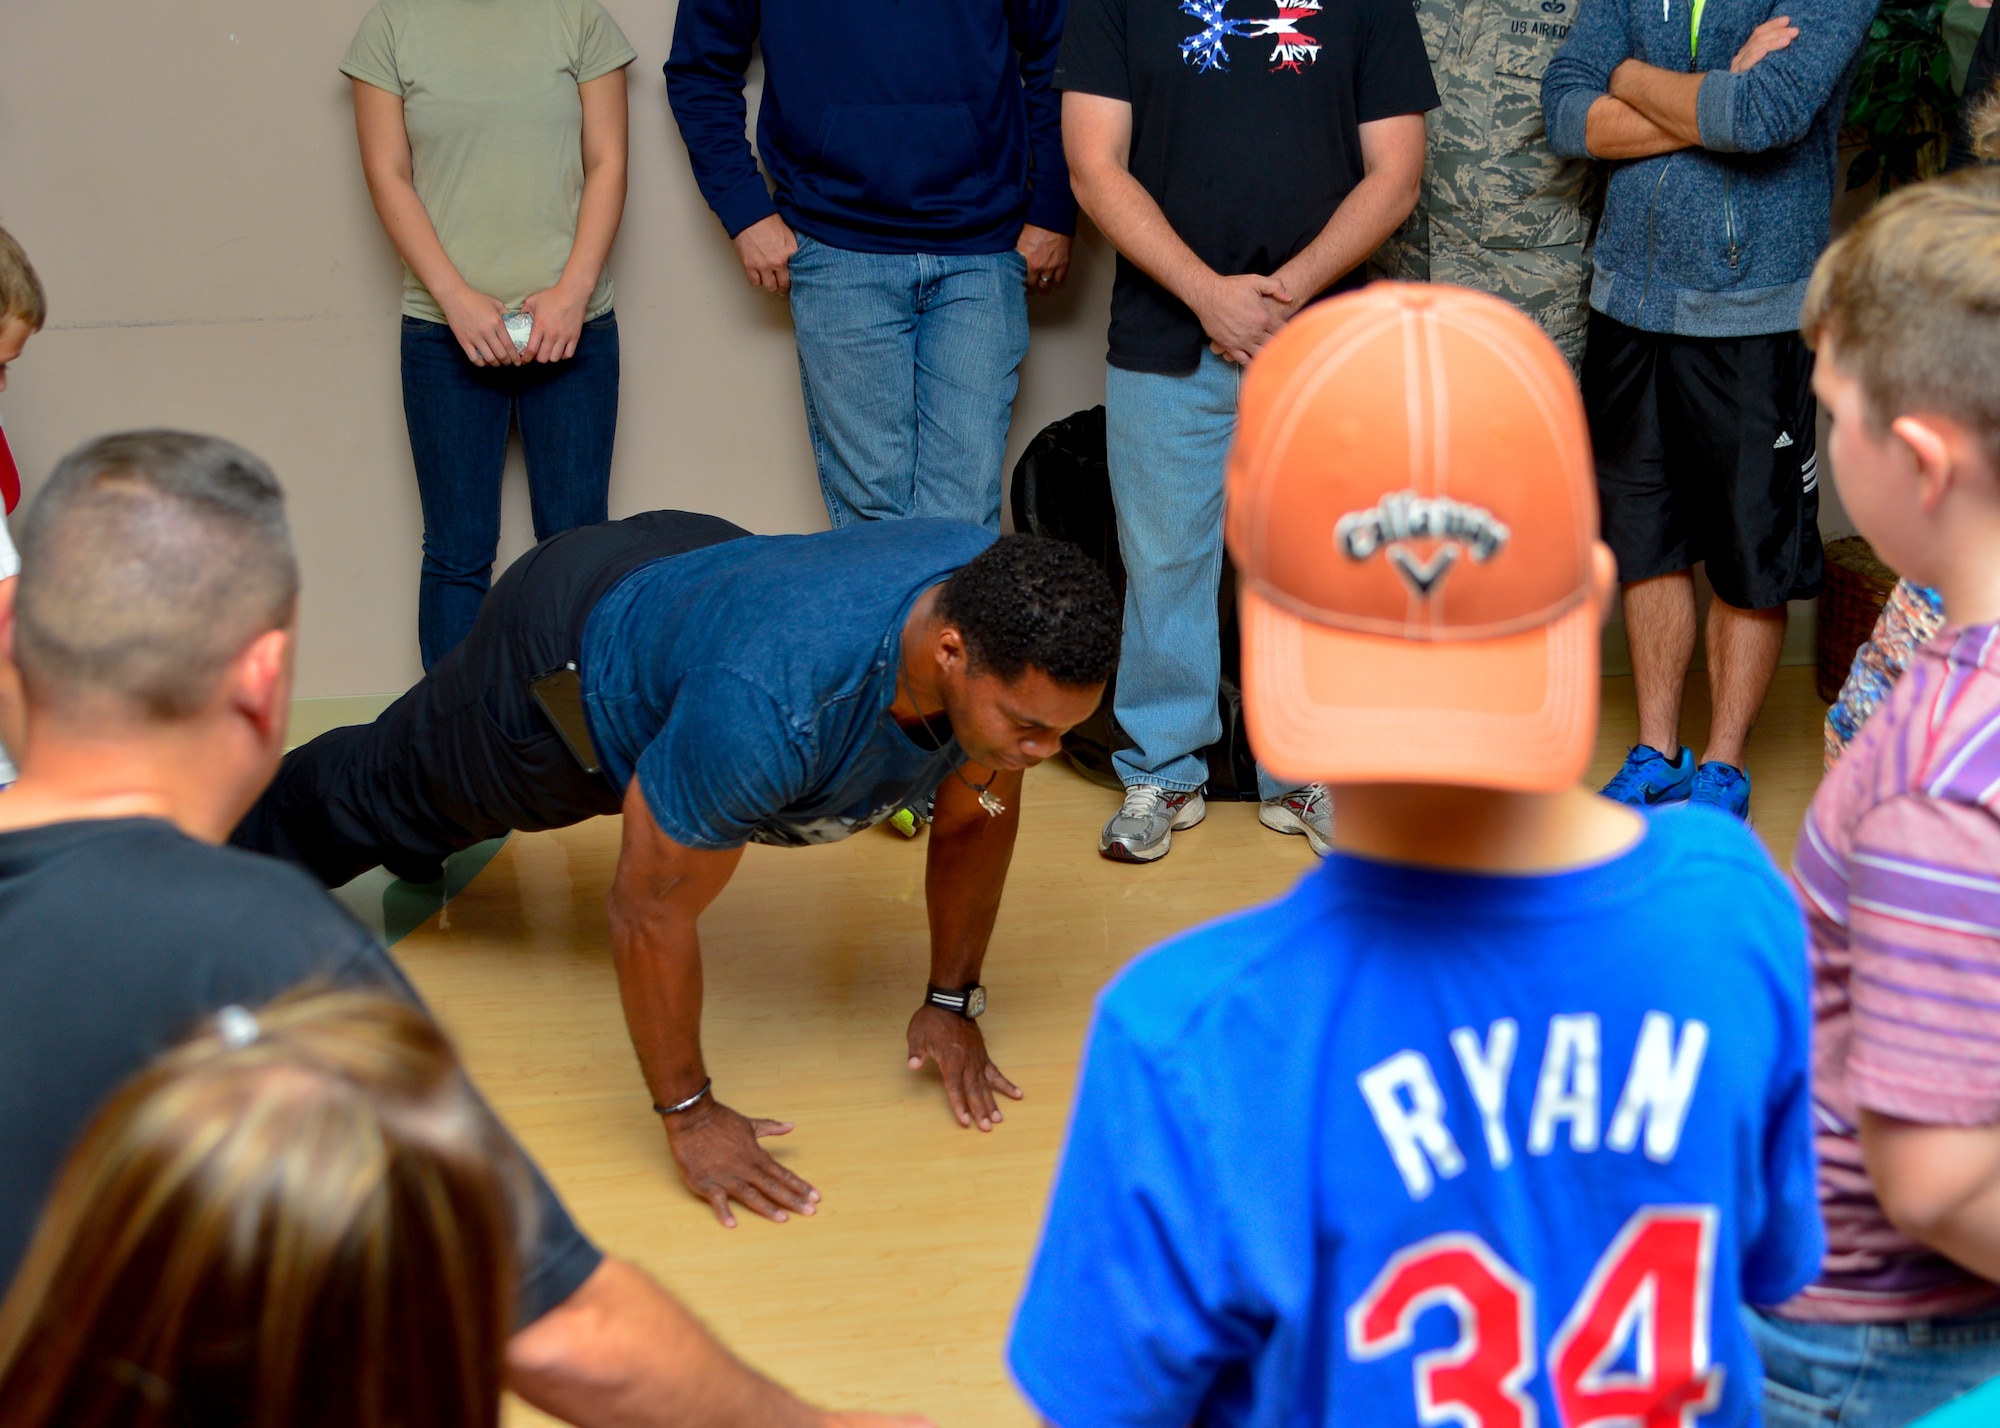 Herschel Walker performs push-ups for children Oct. 14, 2015, at the Youth Center on Dover Air Force Base, Del. Walker demonstrated how push-ups can be performed in a variety of ways to work different muscle groups and build strength in young athletes. (U.S. Air Force photo/Senior Airman William Johnson)